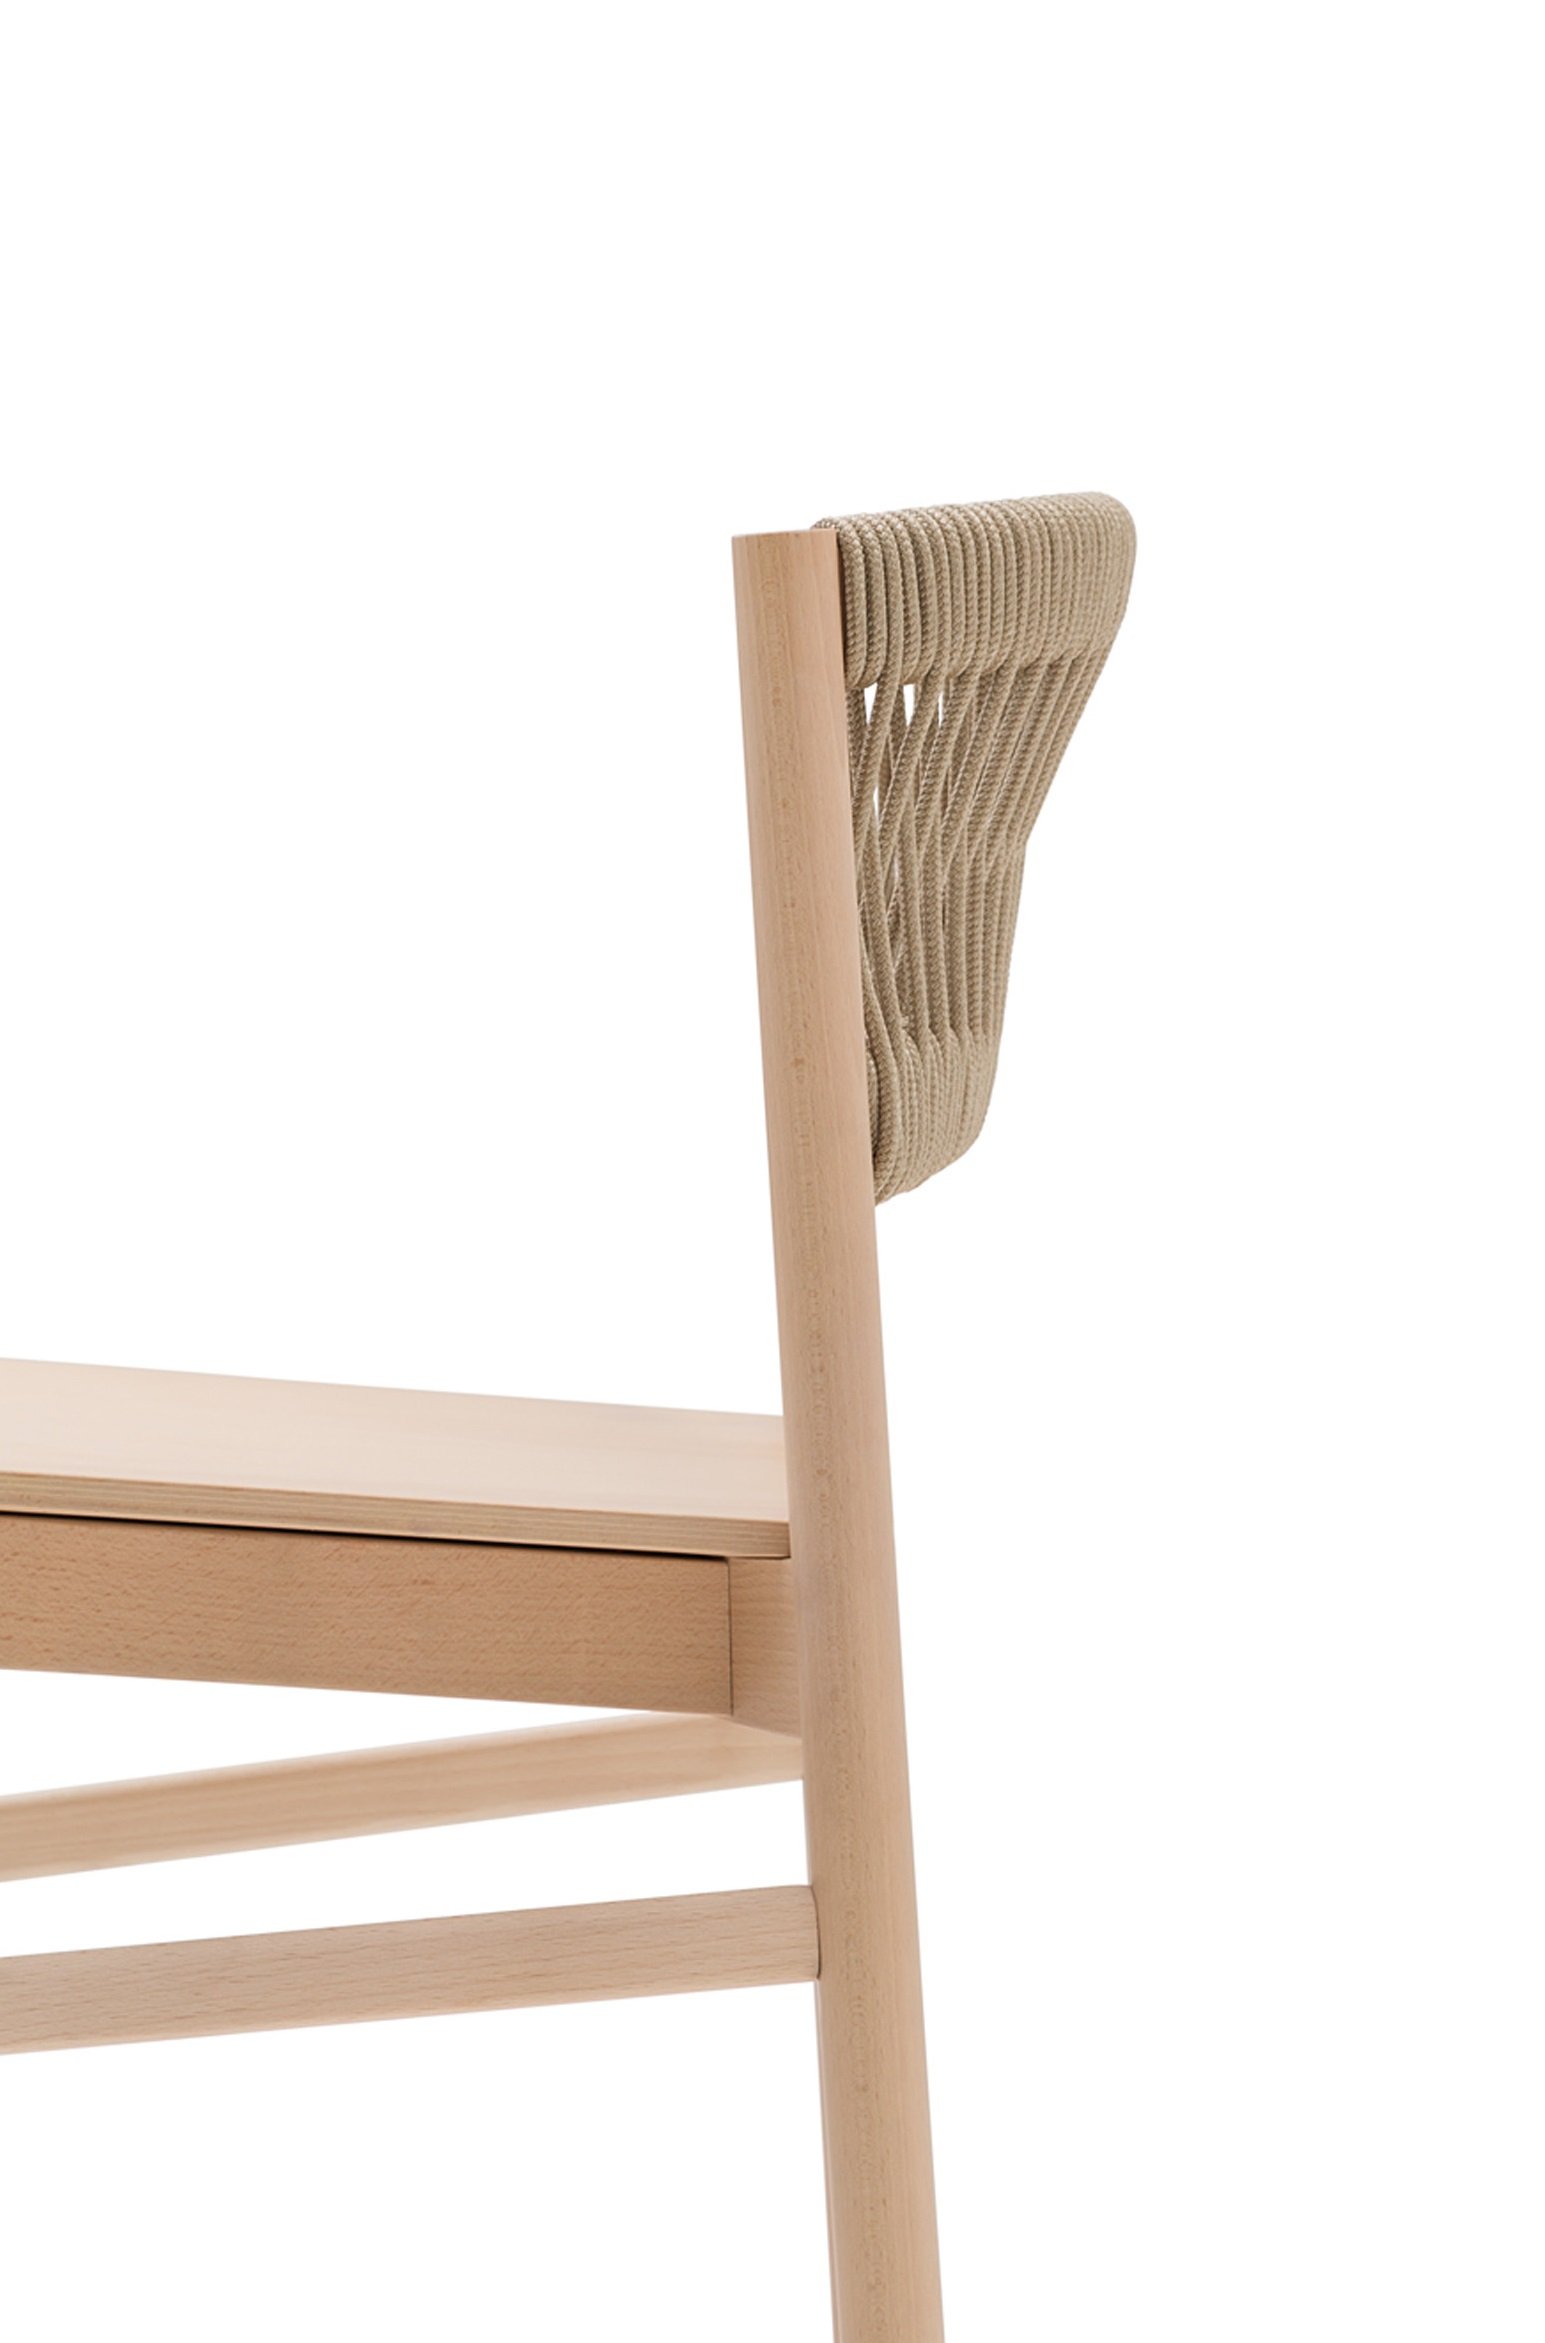 Load Dining Chair from Billiani, designed by Emilio Nanni